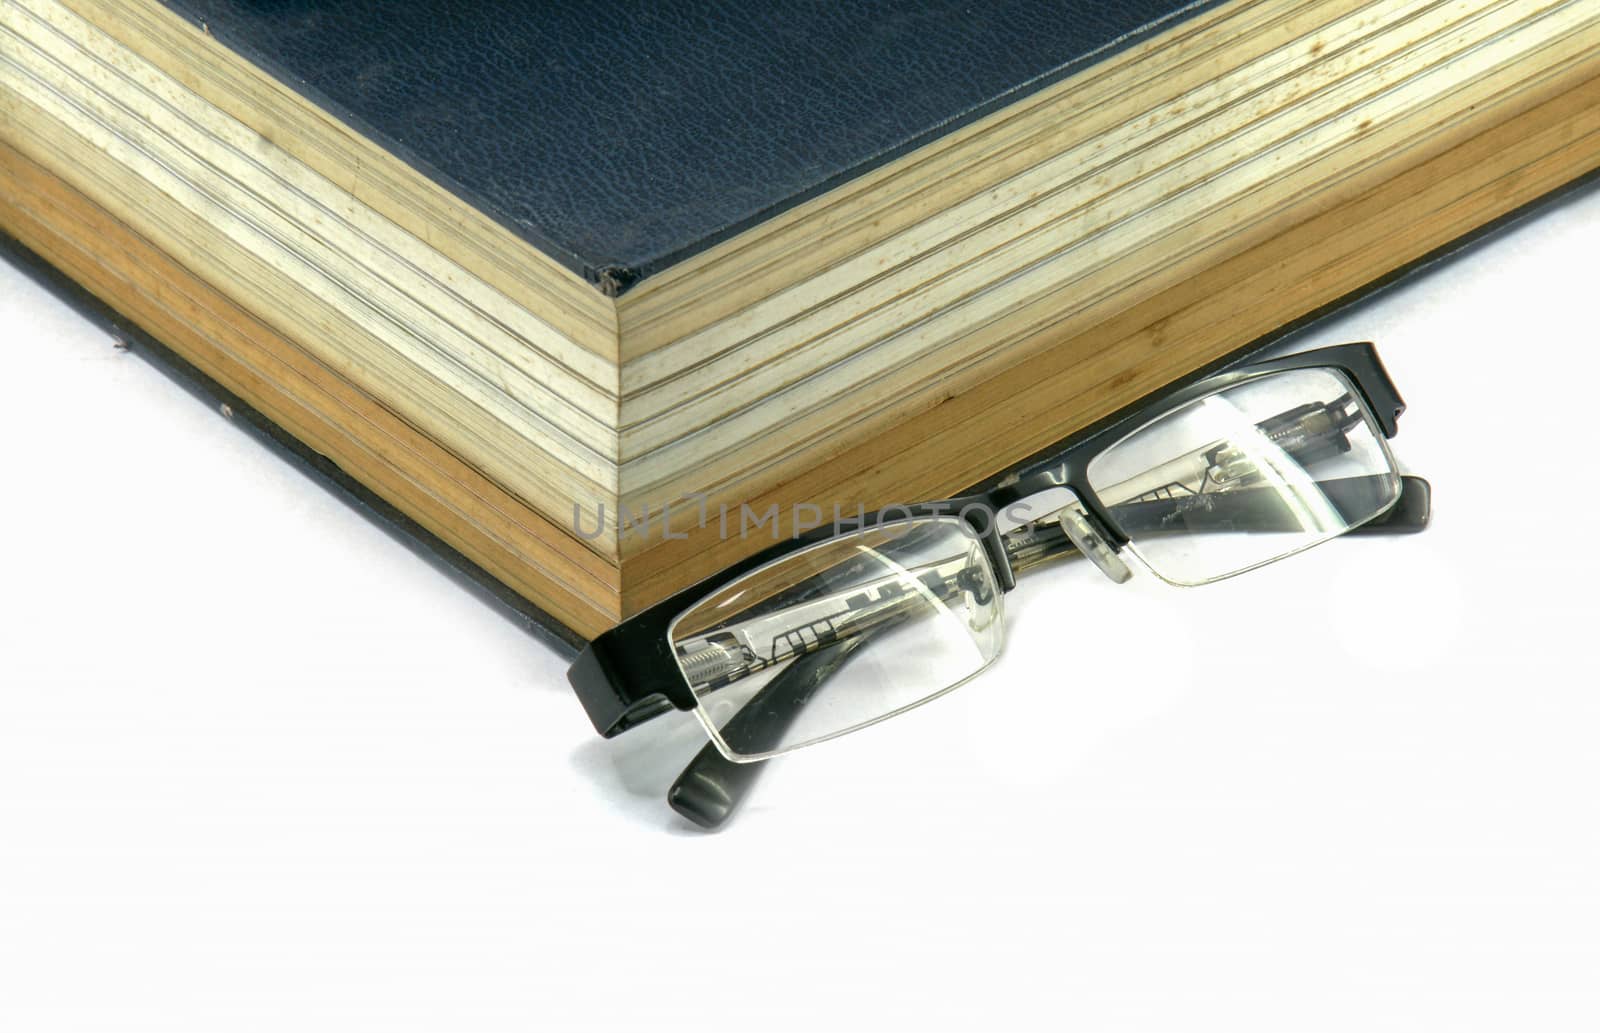 Old text book or bible with eyeglasses by mranucha